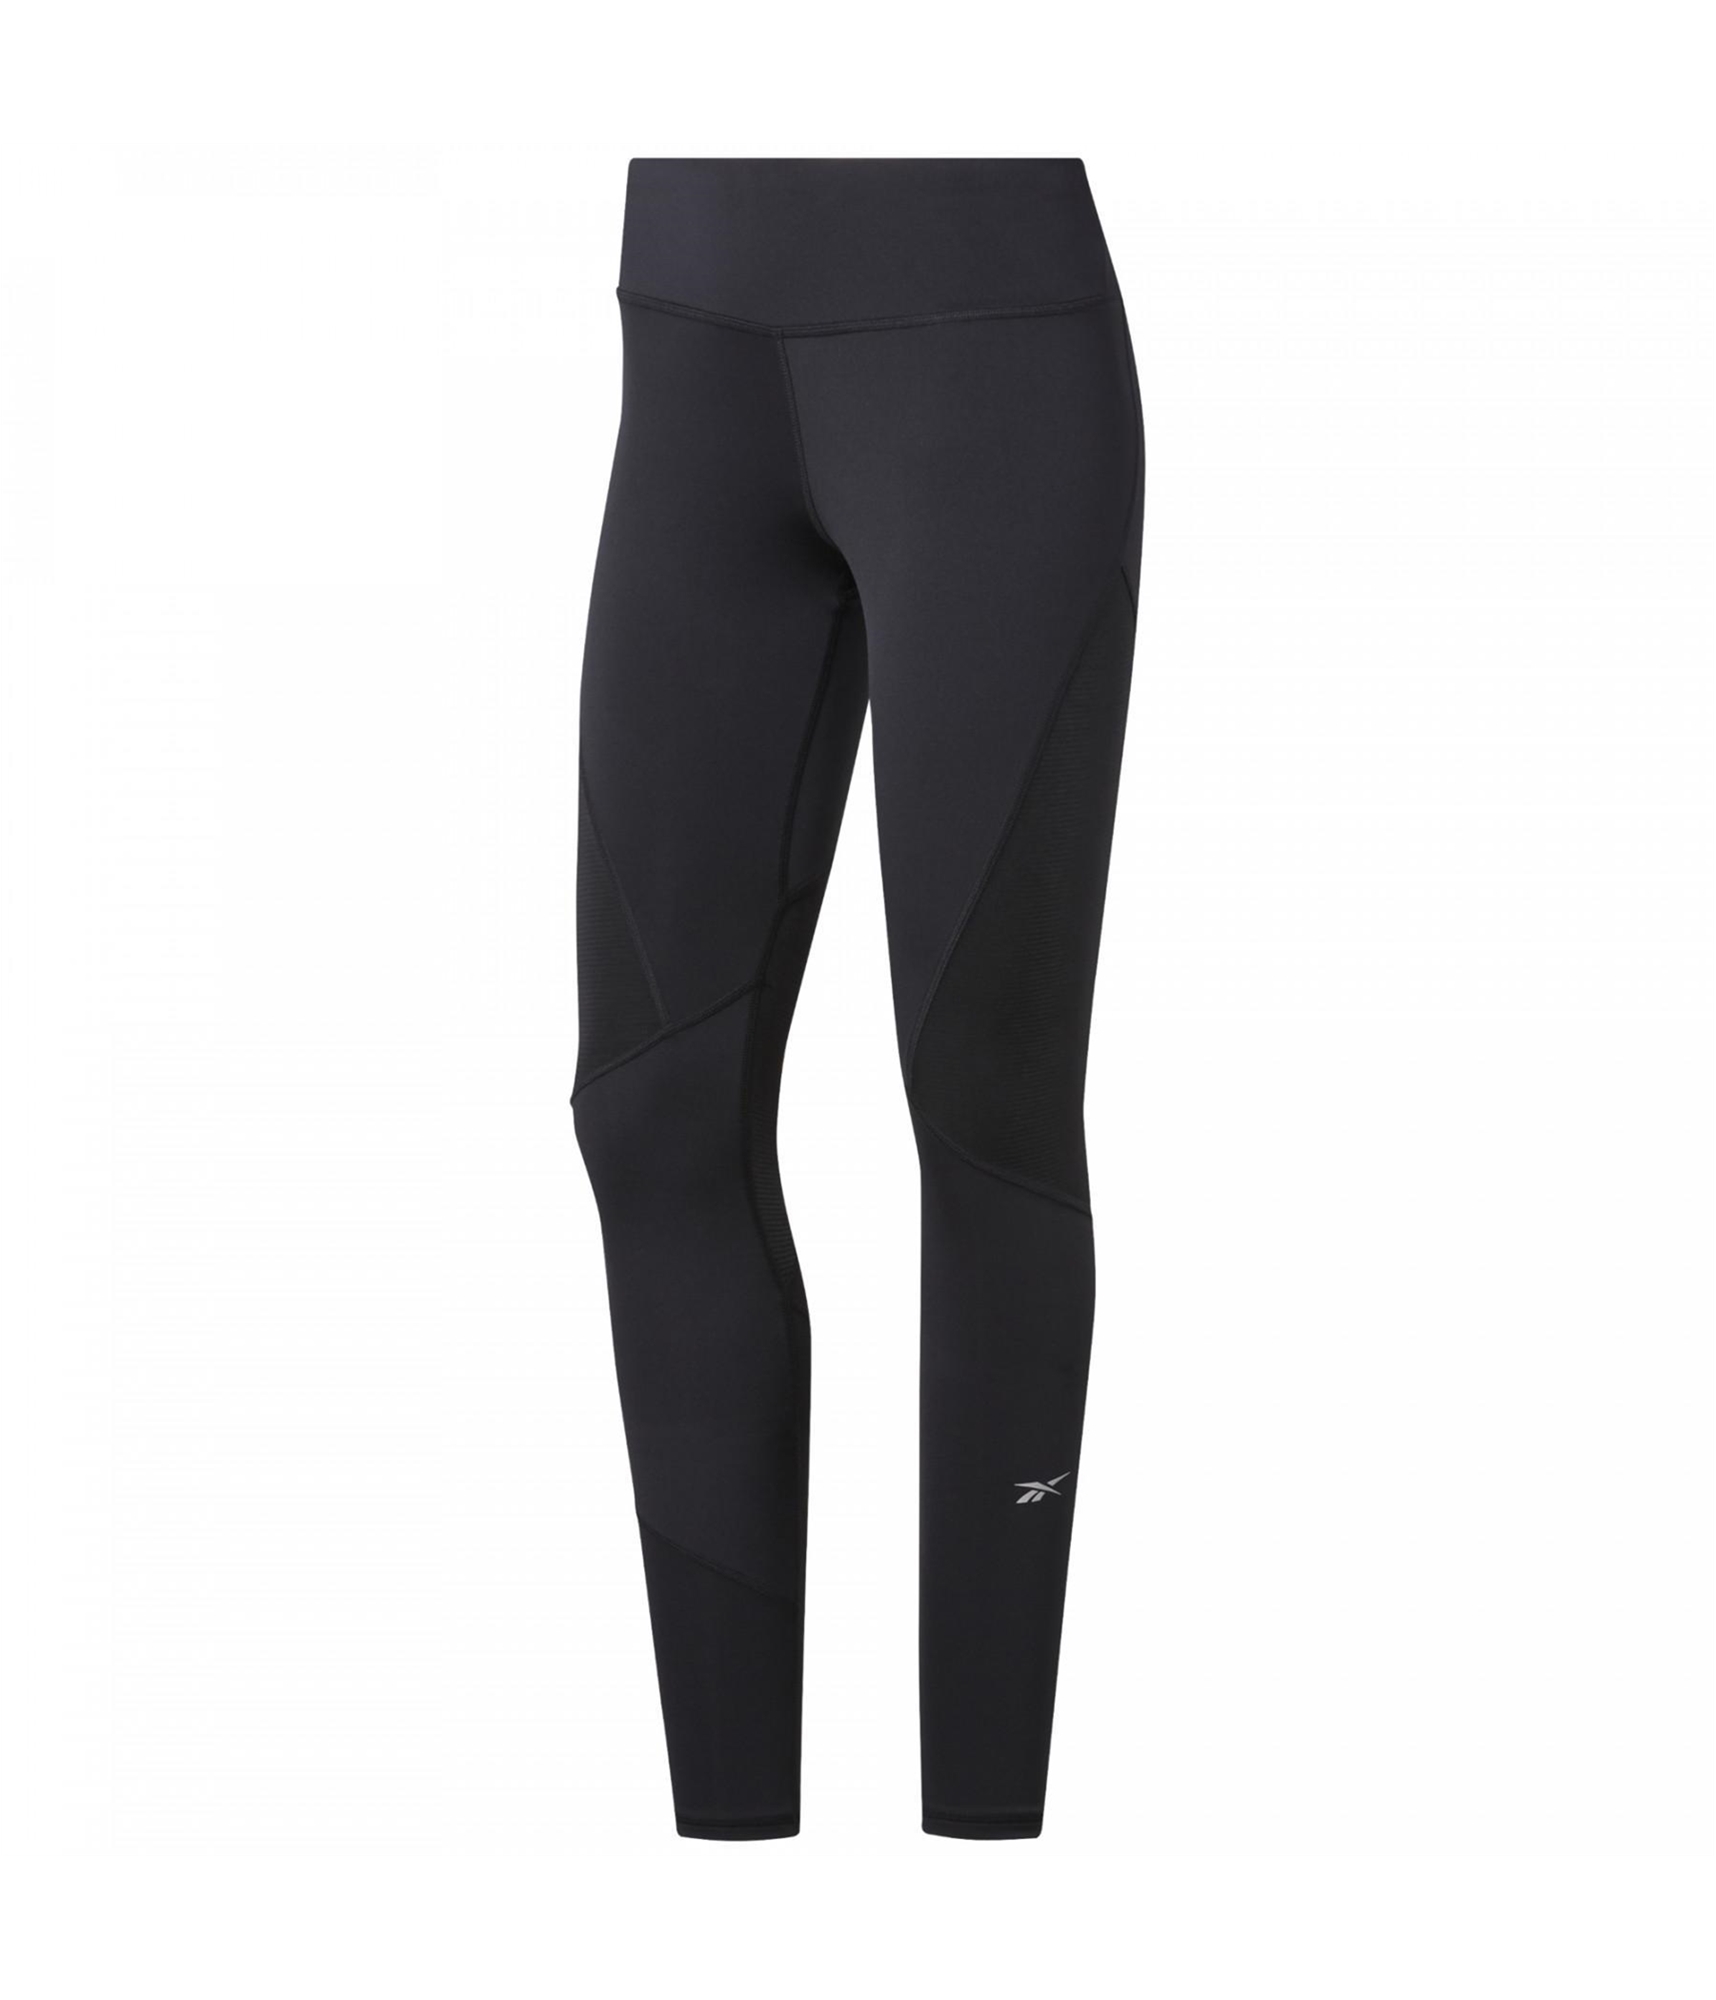 a Womens One Series Compression Athletic Pants Online | TagsWeekly.com,